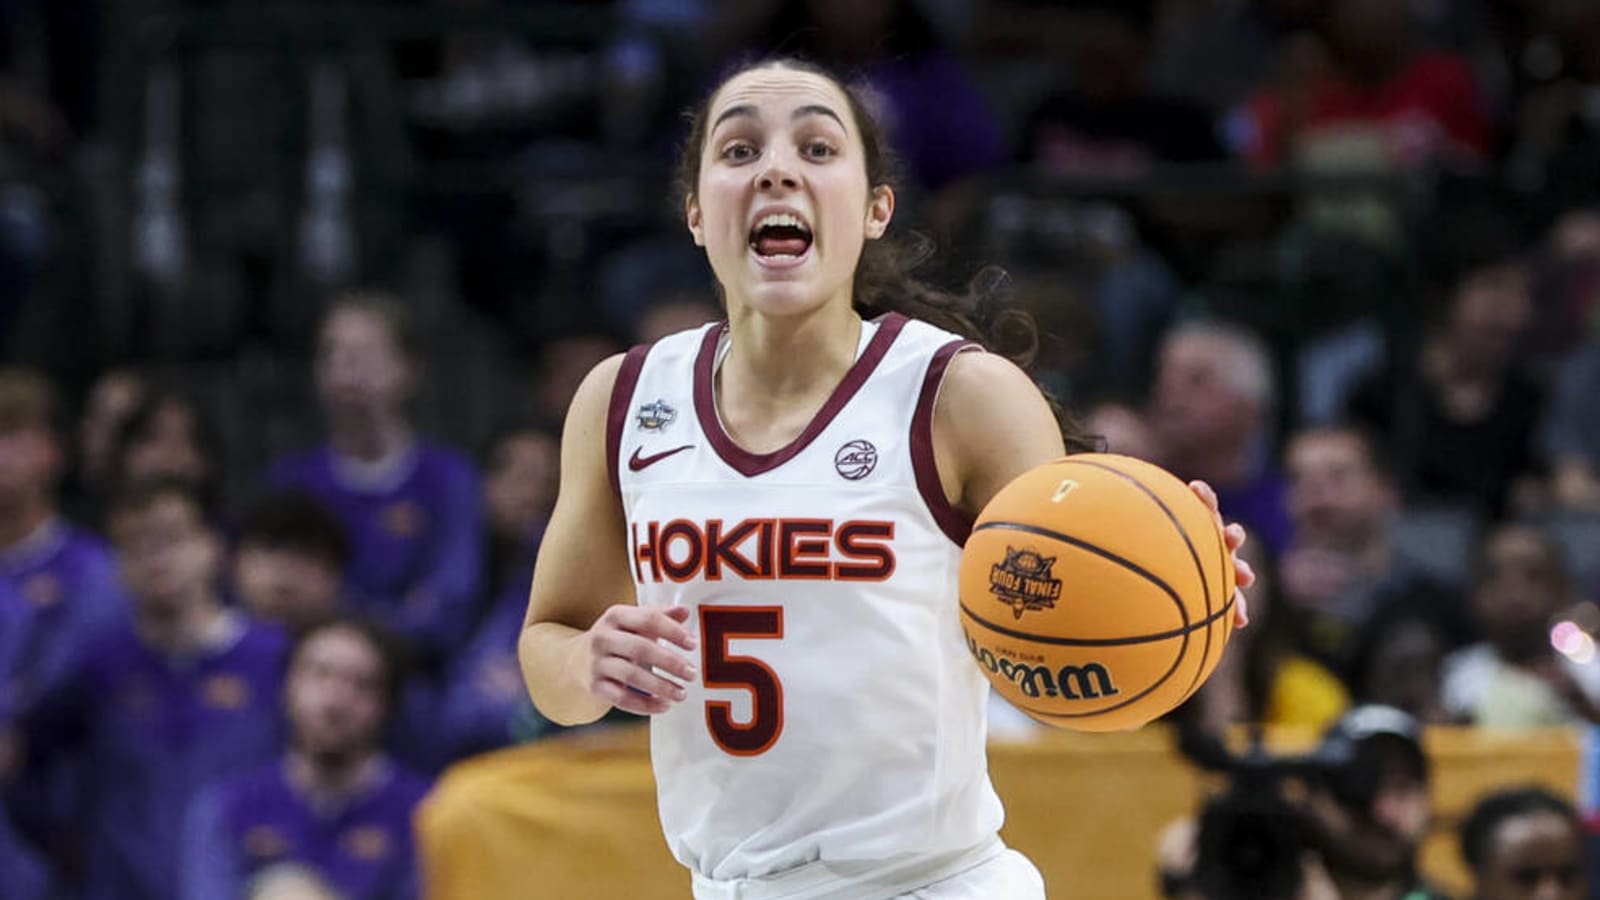 Virginia Tech star sets tourney record for made 3-pointers